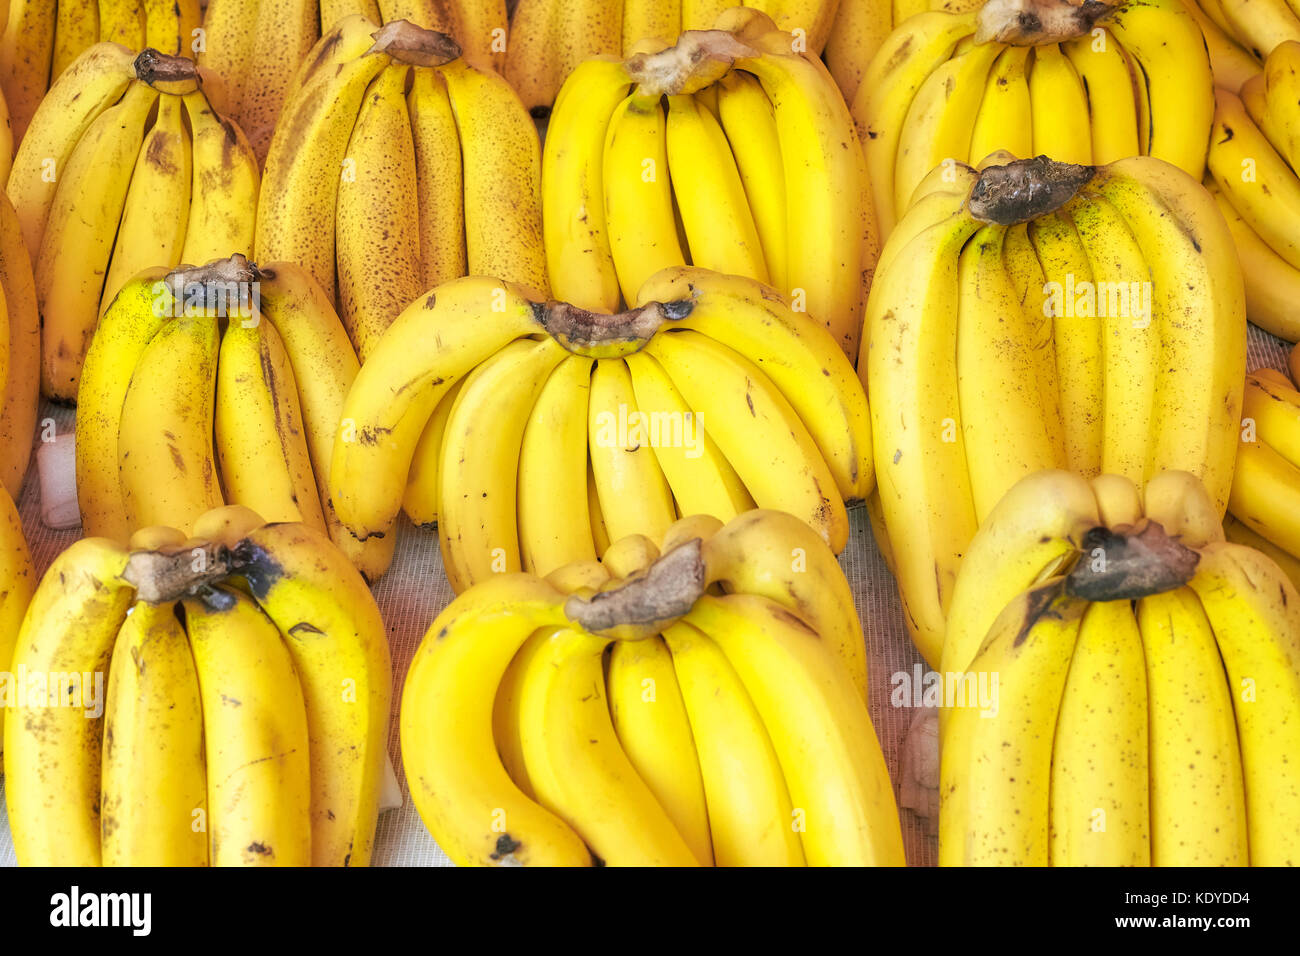 https://c8.alamy.com/comp/KDYDD4/natural-ripe-organic-banana-bunches-on-a-local-market-selective-focus-KDYDD4.jpg